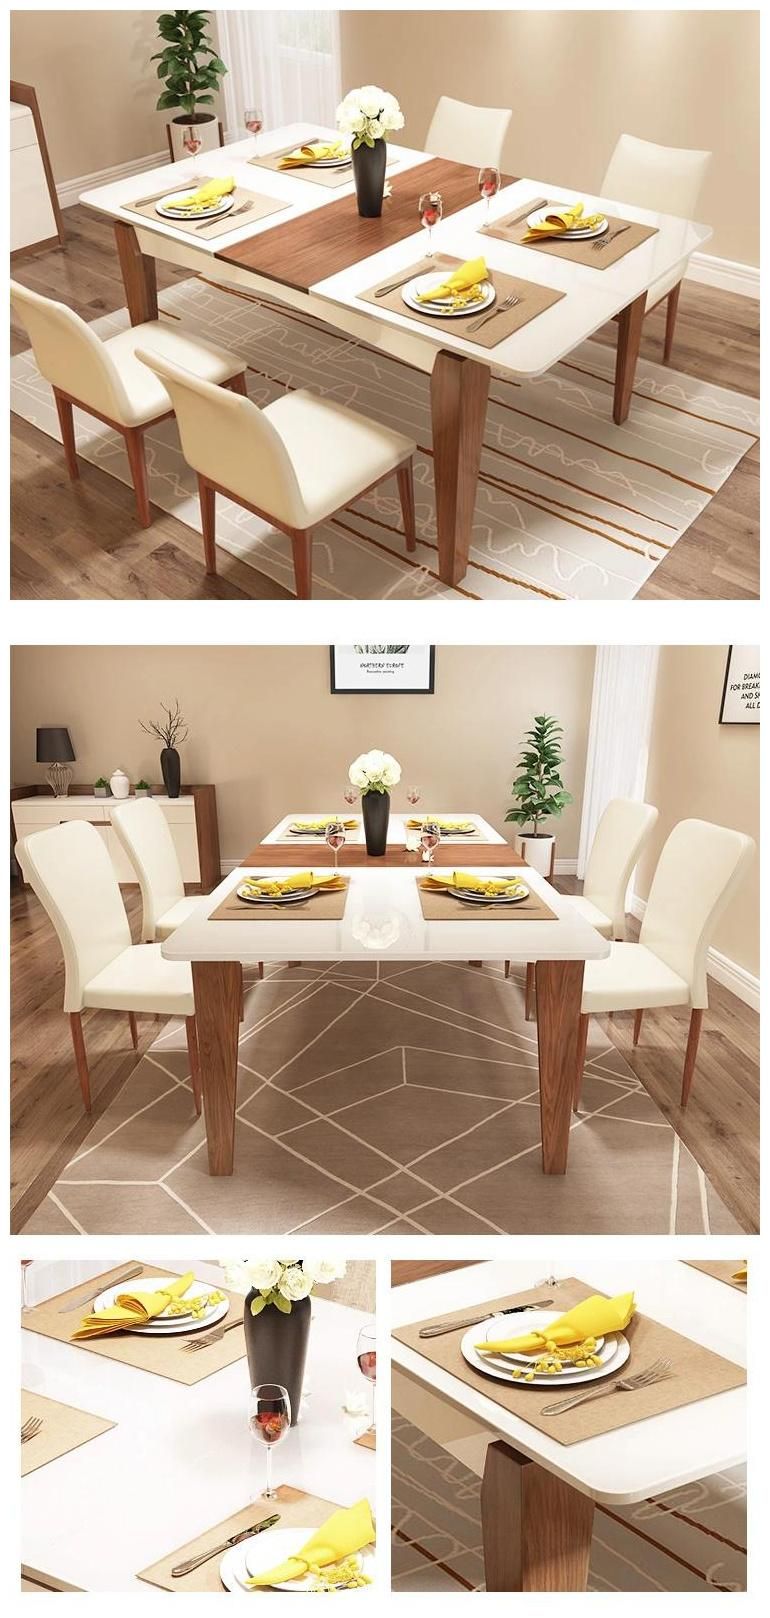 Home Kitchen Square Italian Modern Table Wooden Dining Room Furniture Sets